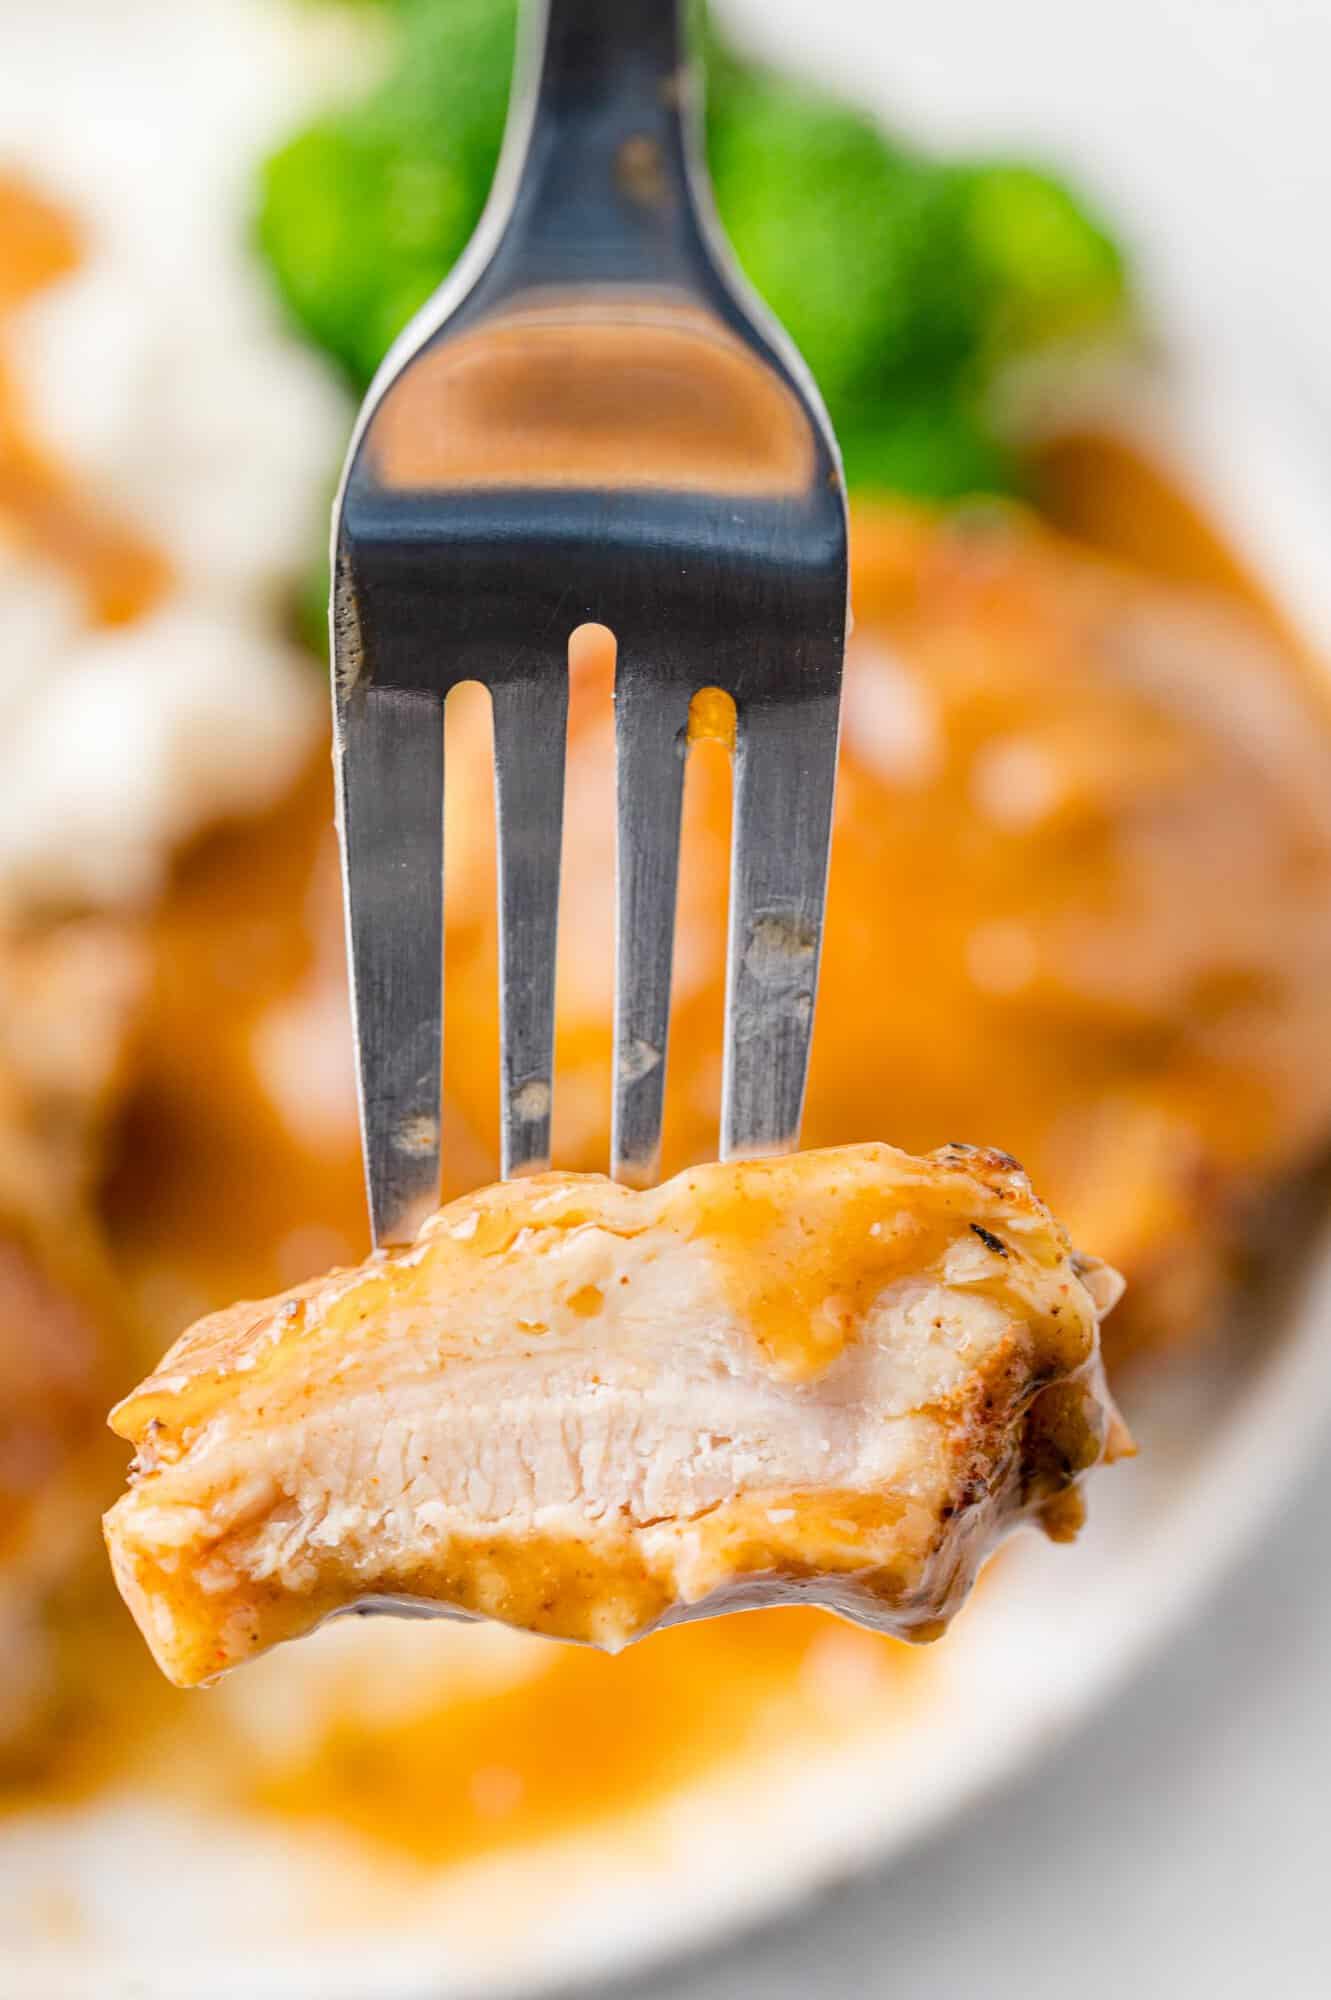 Chicken thigh on fork, cut to show inside.